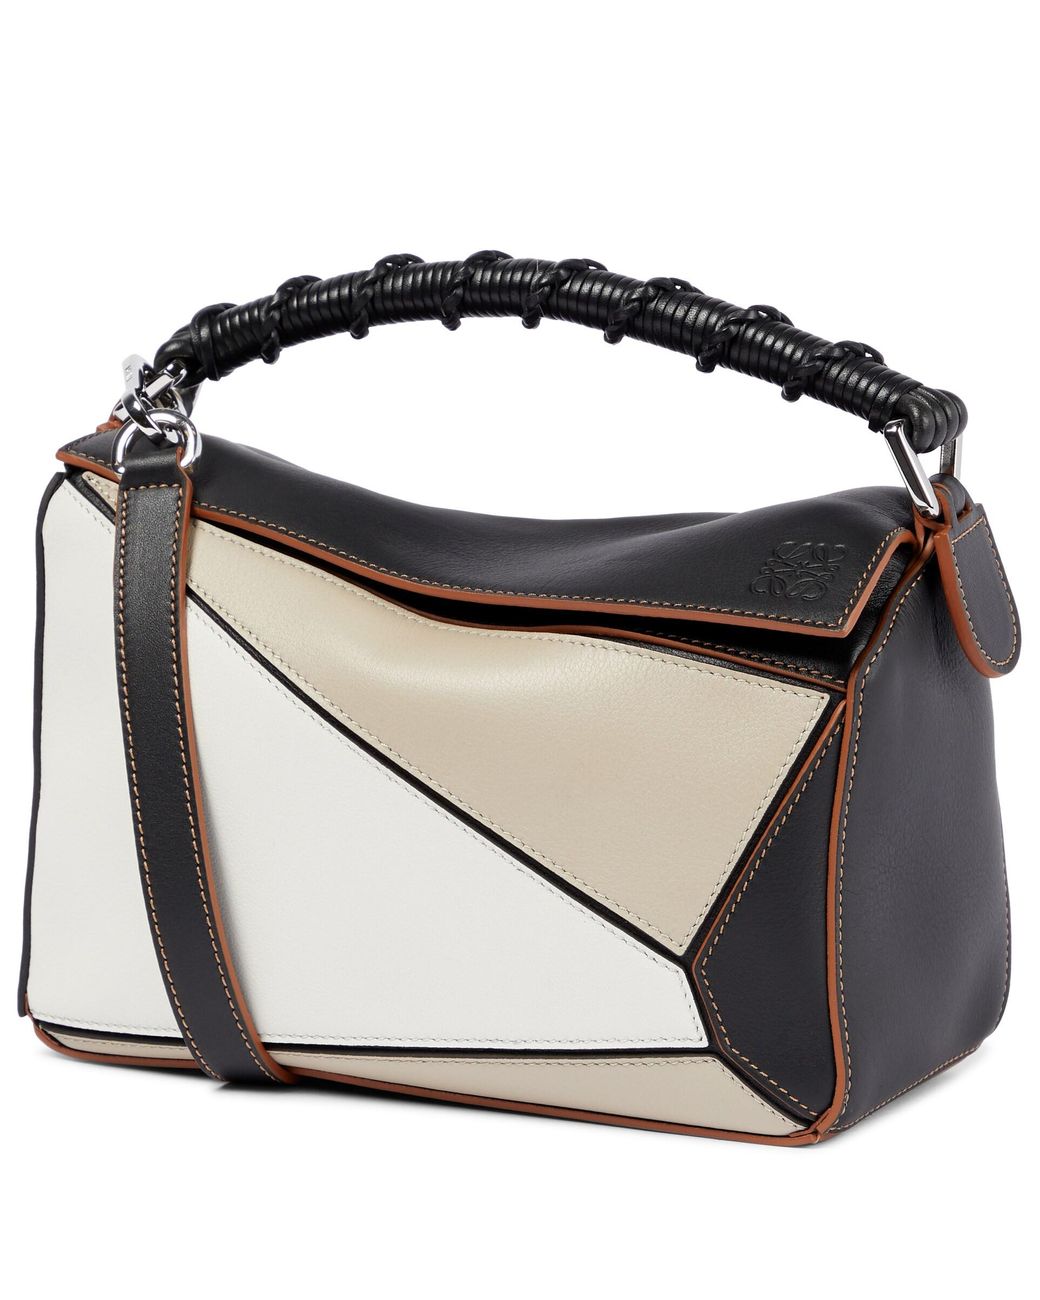 Loewe Puzzle Craft Small Leather Shoulder Bag in Black | Lyst